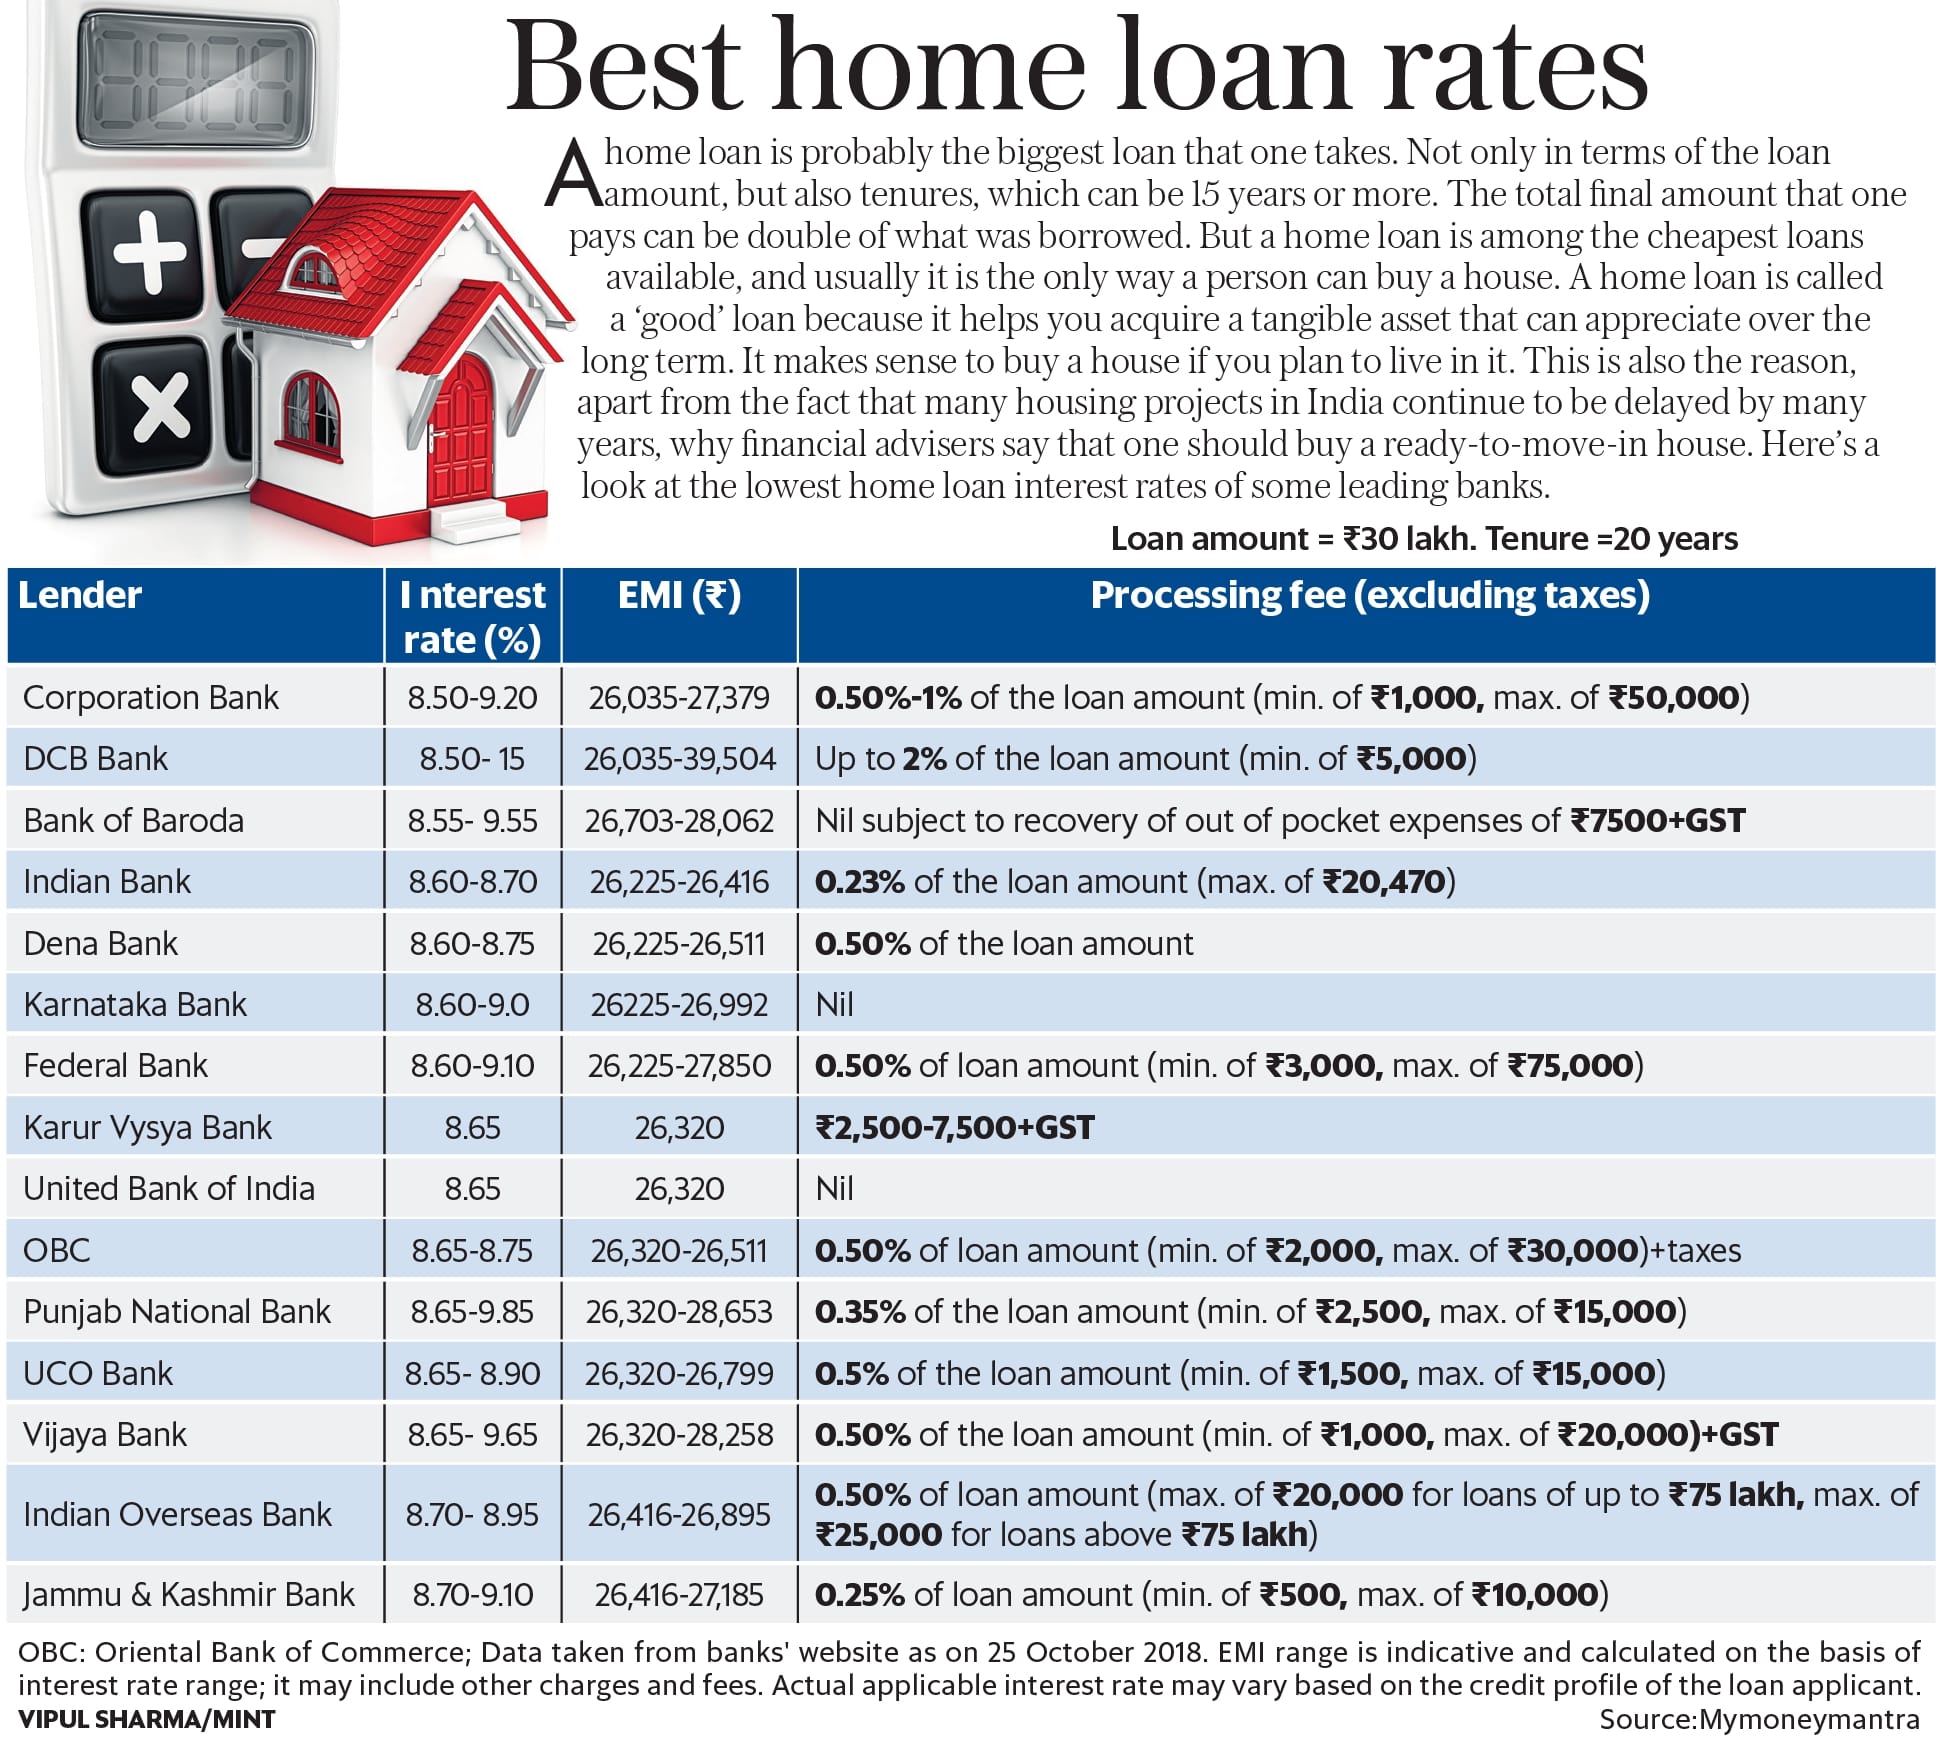 The best home loan rates being offered right now